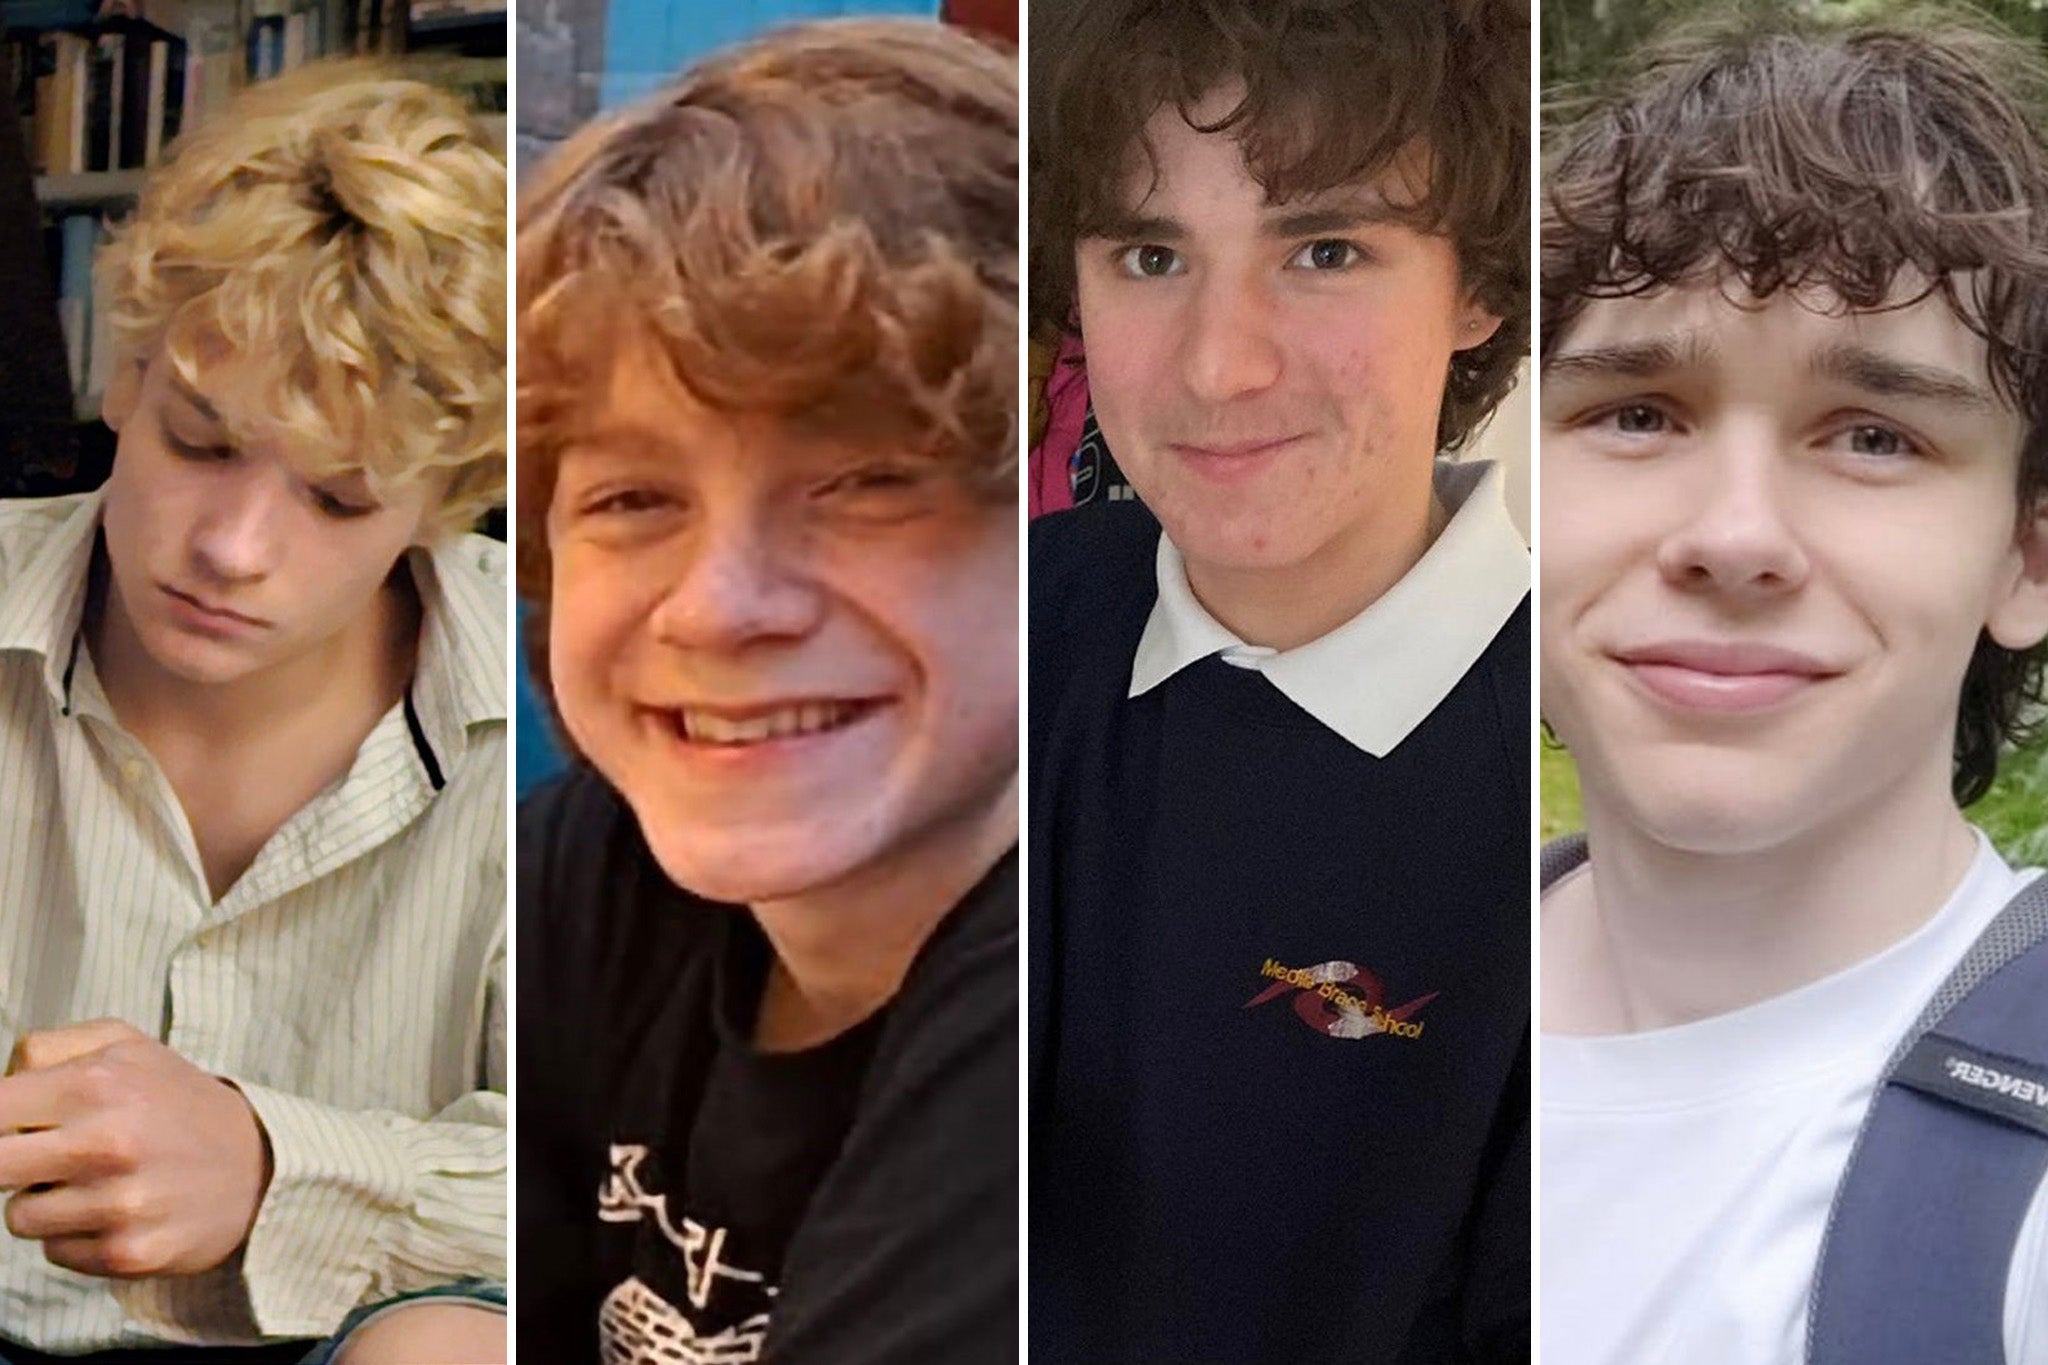 The four teenagers from left to right; Jevon Hirst, Wilf Fitchett, Harvey Owen and Hugo Morris